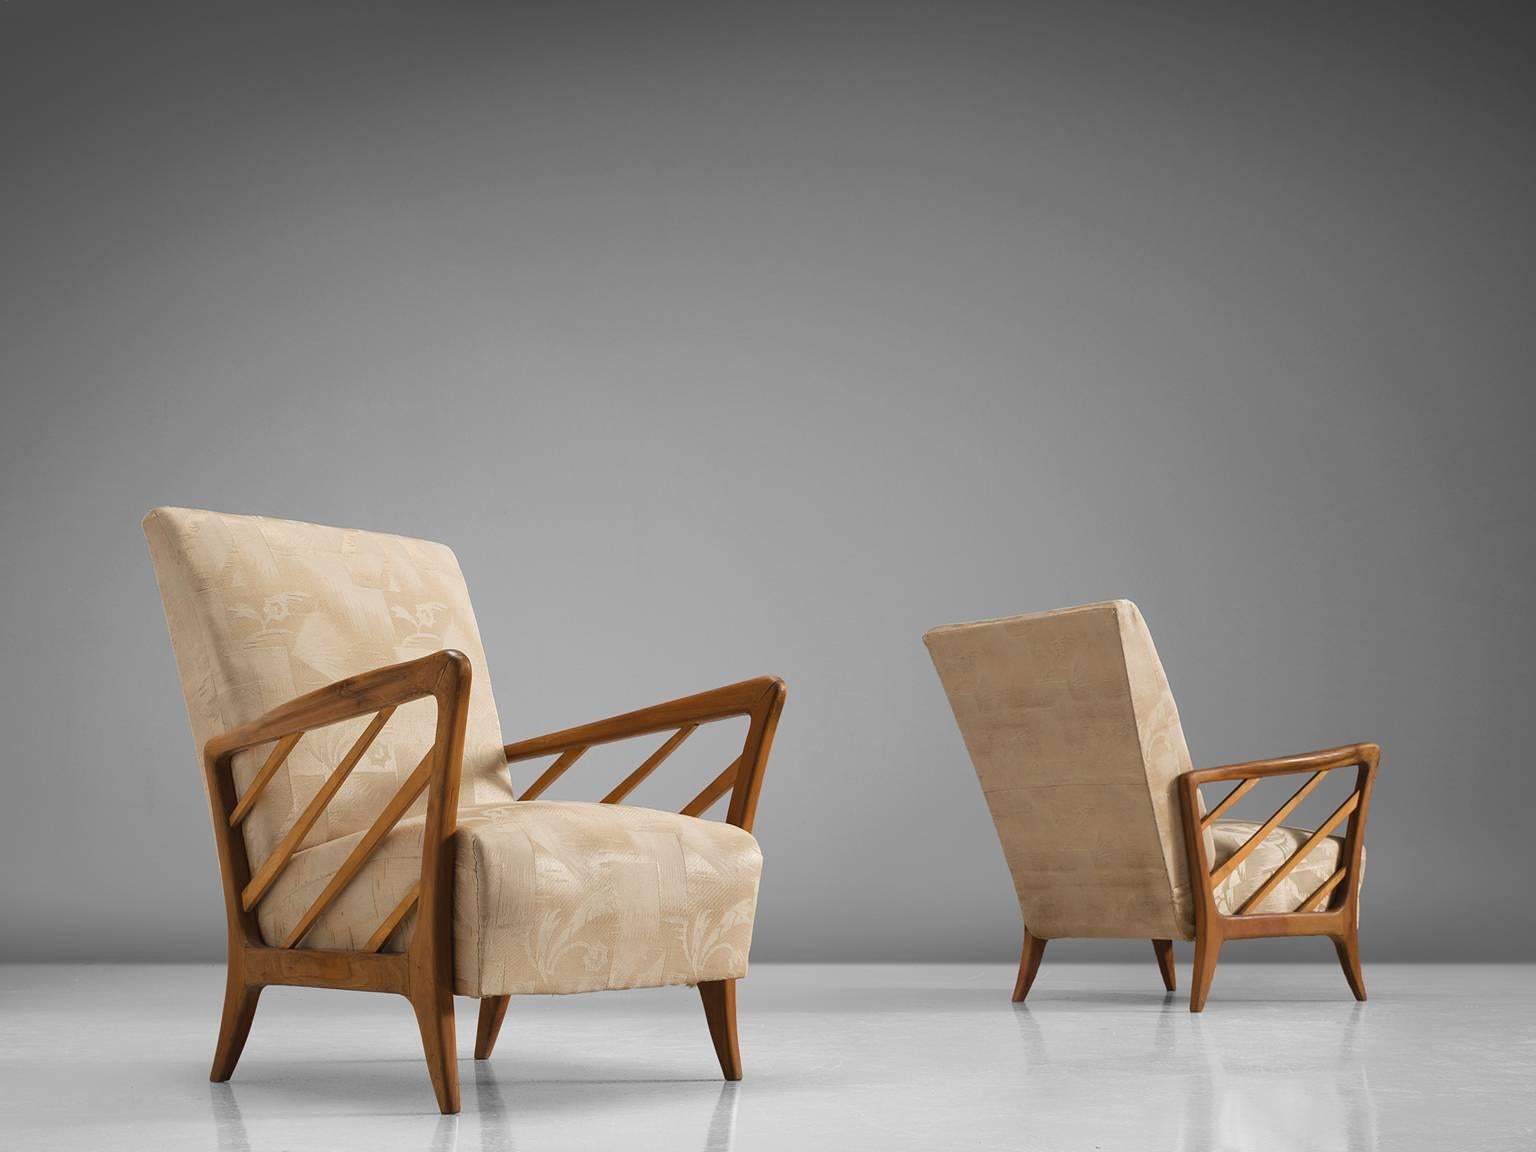 Paolo Buffa style chairs, Italian walnut and floral beige fabric, 1960s, Italy.

This poetic armchairs are made in the style of Paolo Buffa (1903-1970). The most distinctive feature within these armchairs are the armrests that have slats. The